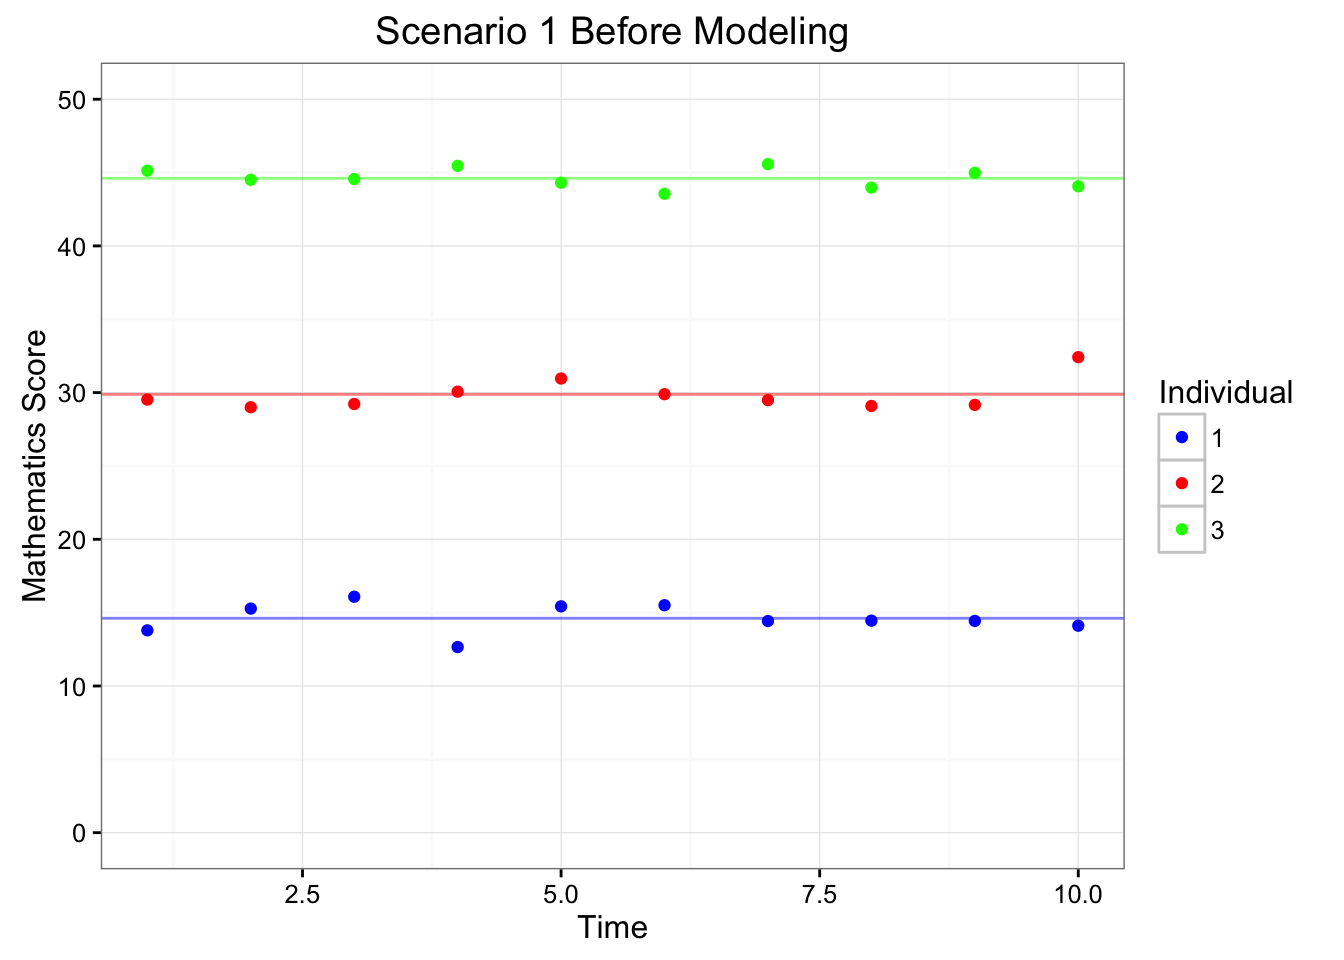 Depiction of Scenarios 1 Before and After Modeling